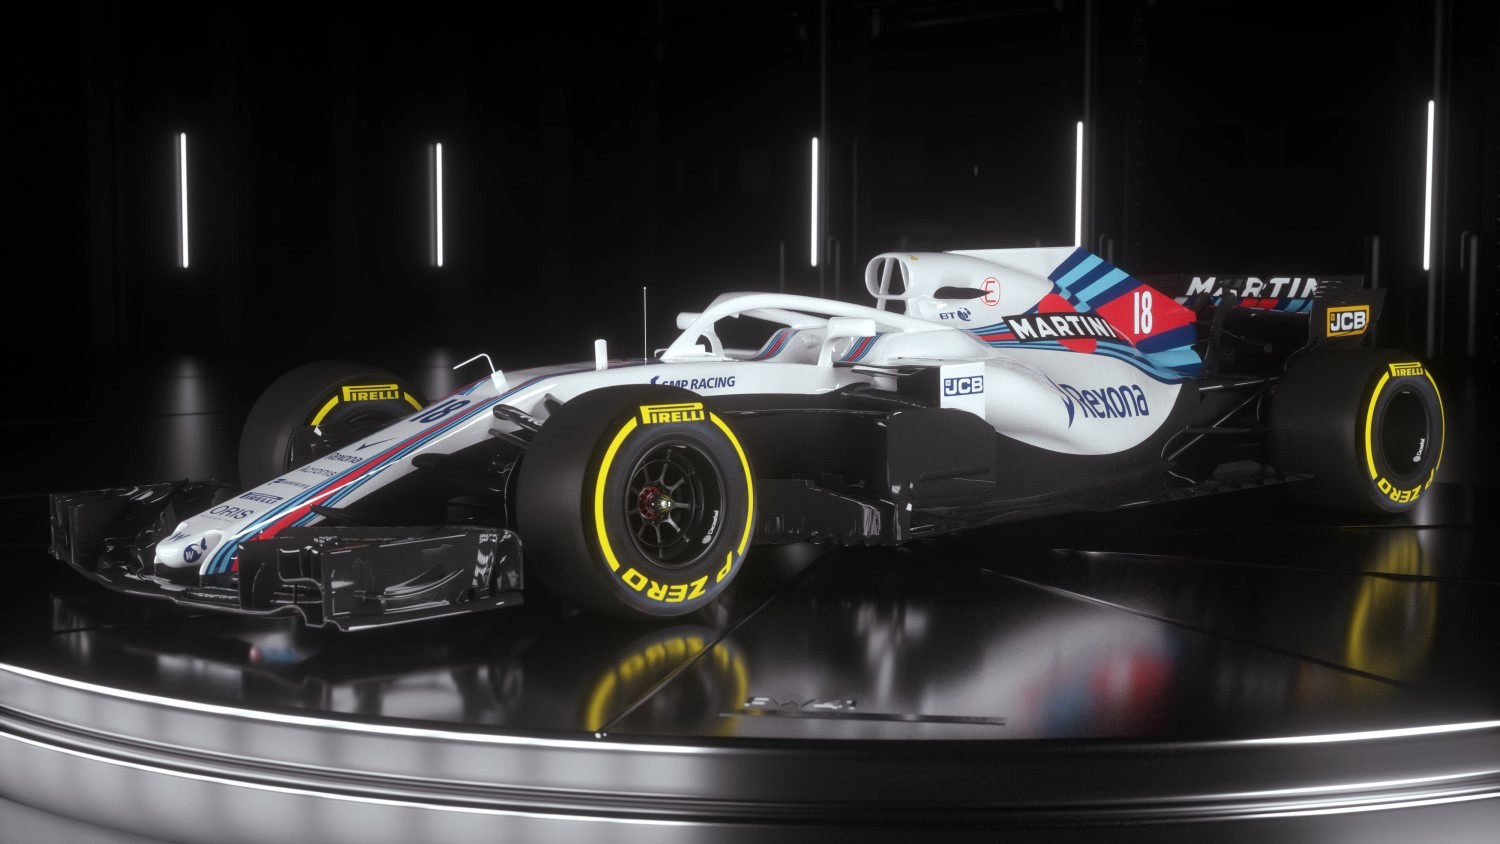 Major design flaw in Paddy Lowe's Williams